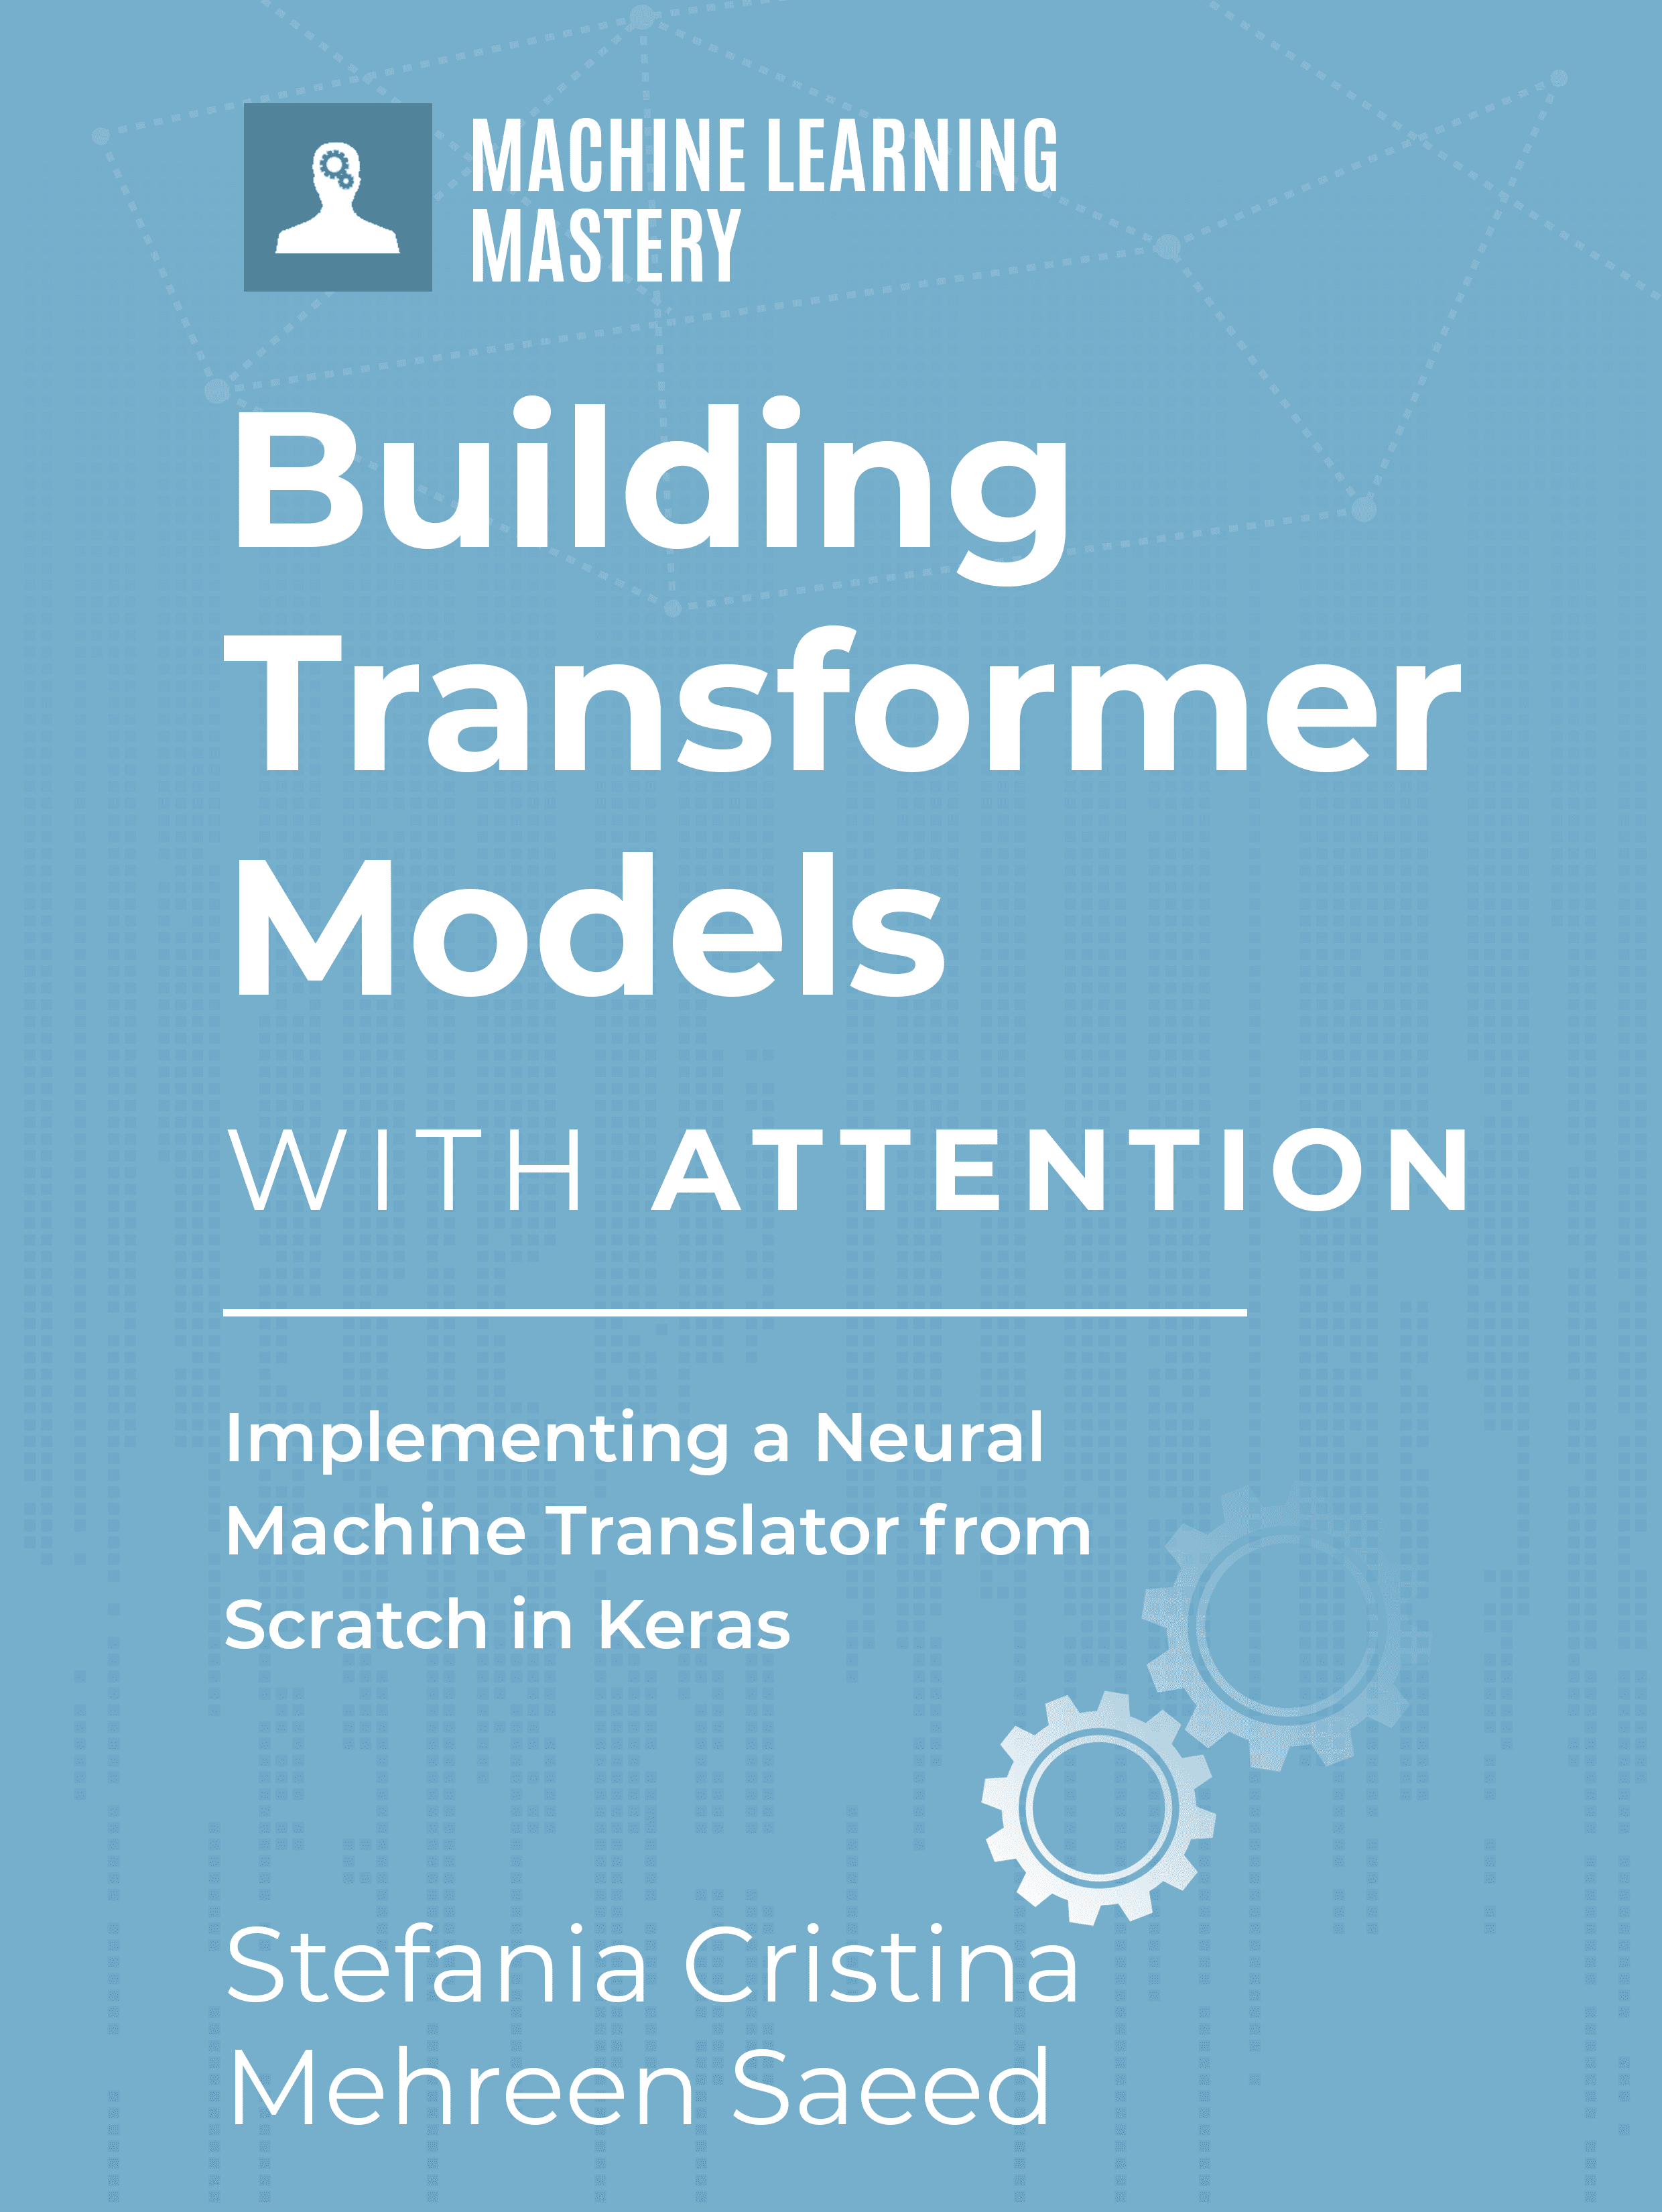 Building Transformer Models with Attention